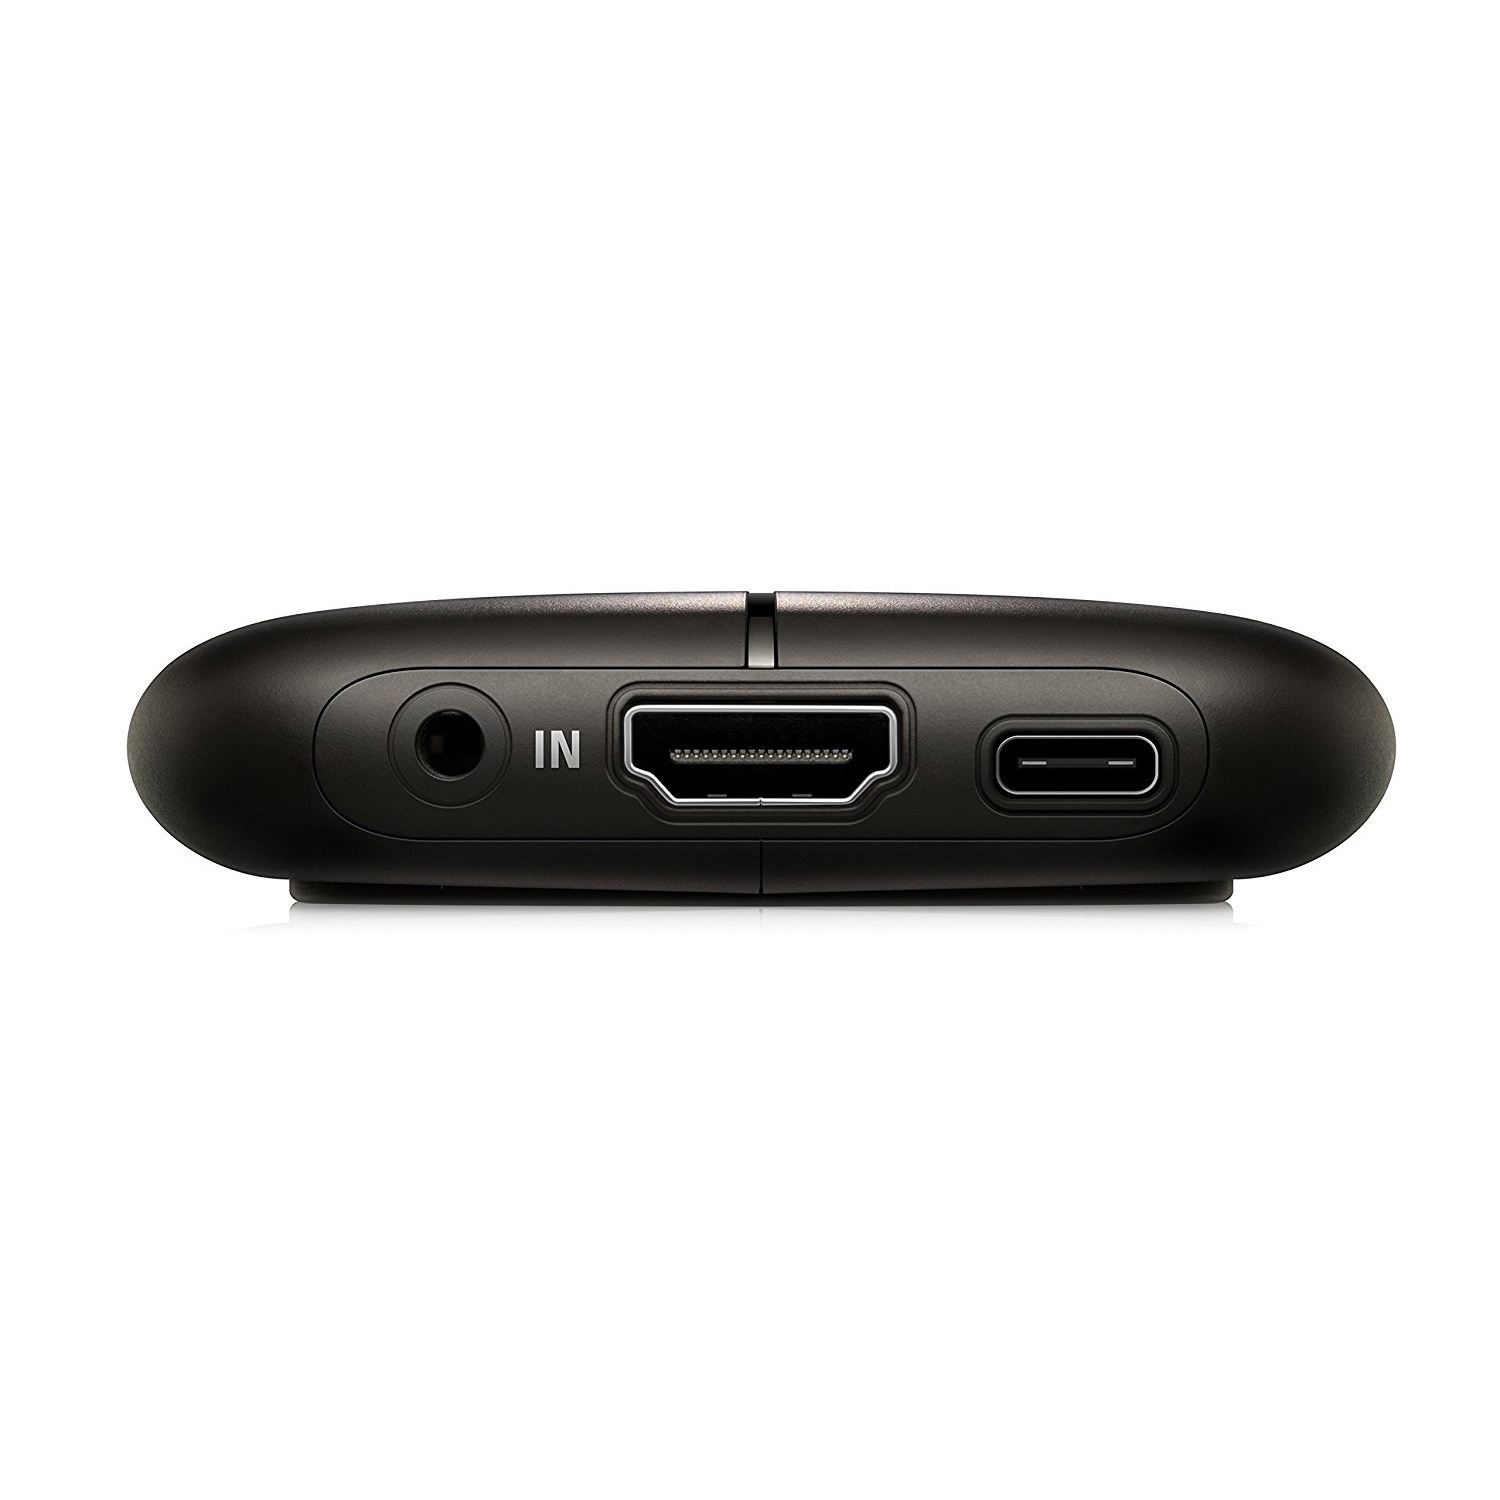 mac capture card for xbox 360